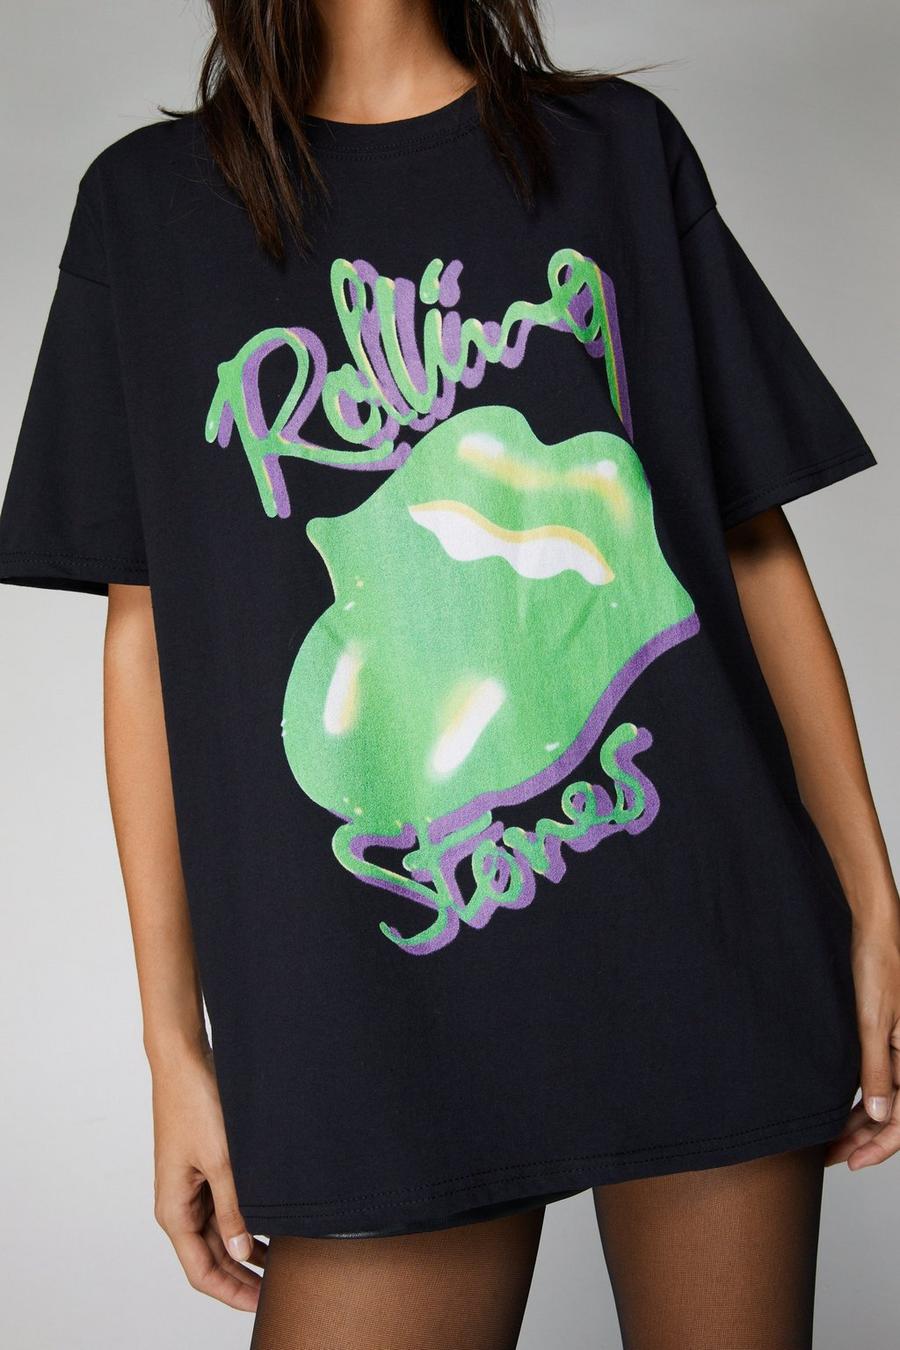 Rolling Stones Green Oversized Graphic T-shirt